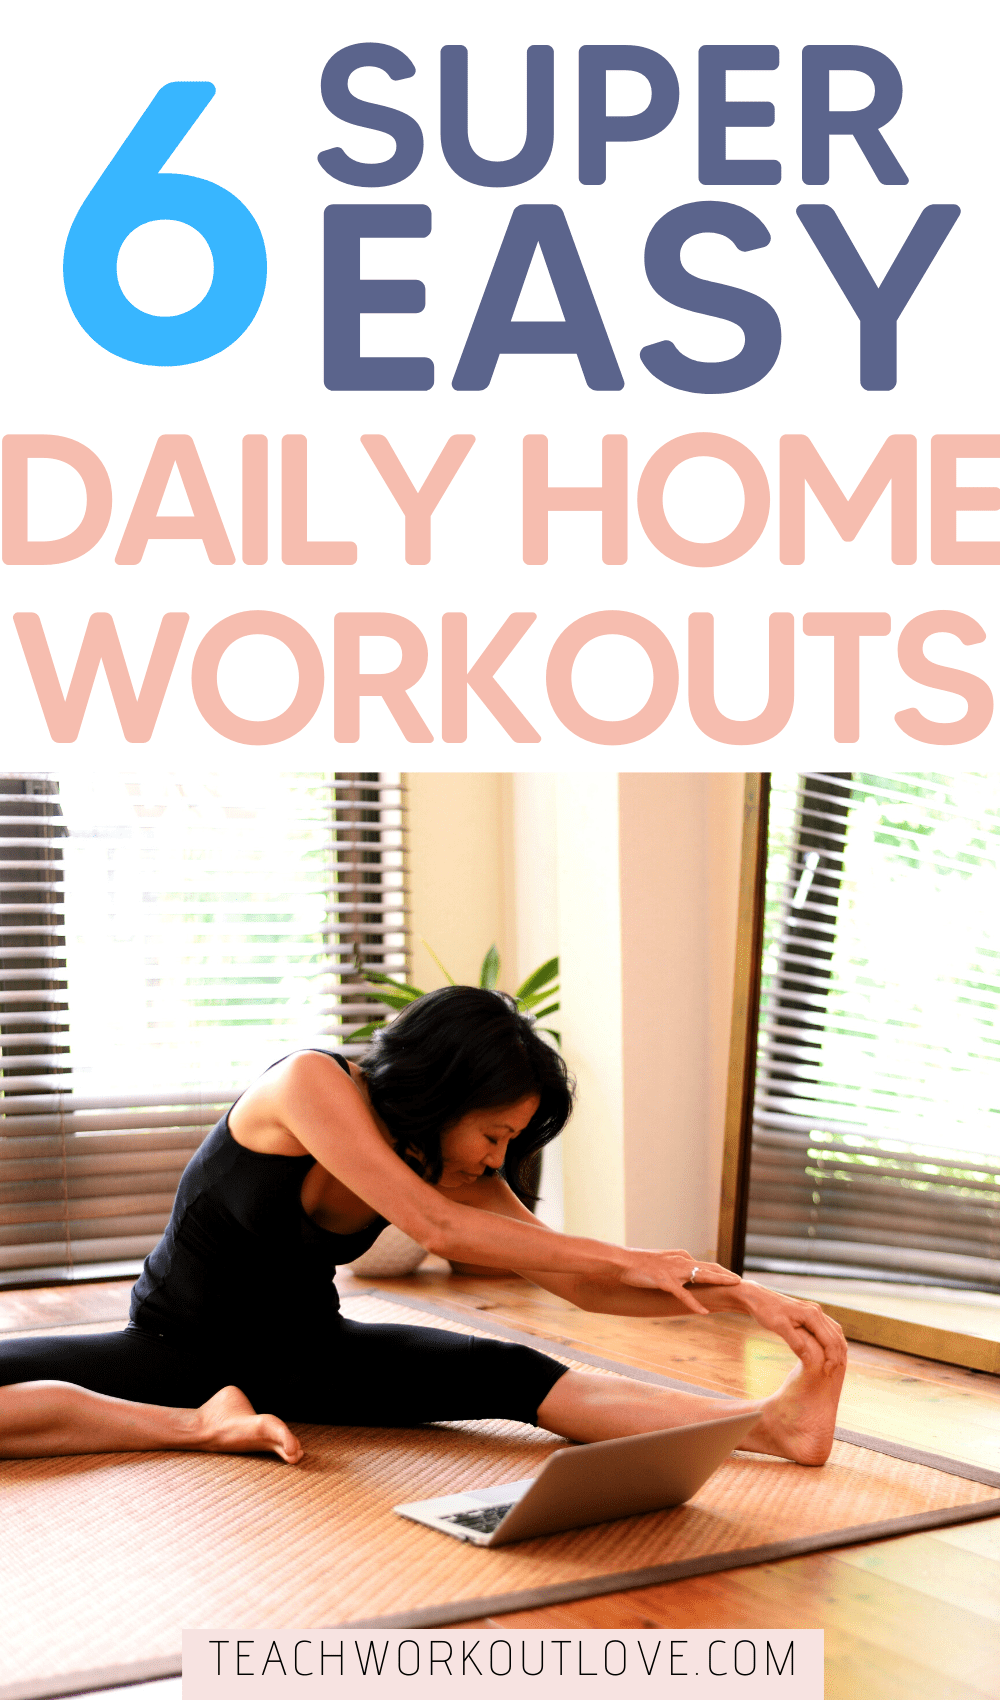 Working out at home? Our simple and excellent guide on easy daily home workouts should help you get in shape and stay fit no matter where you are! 